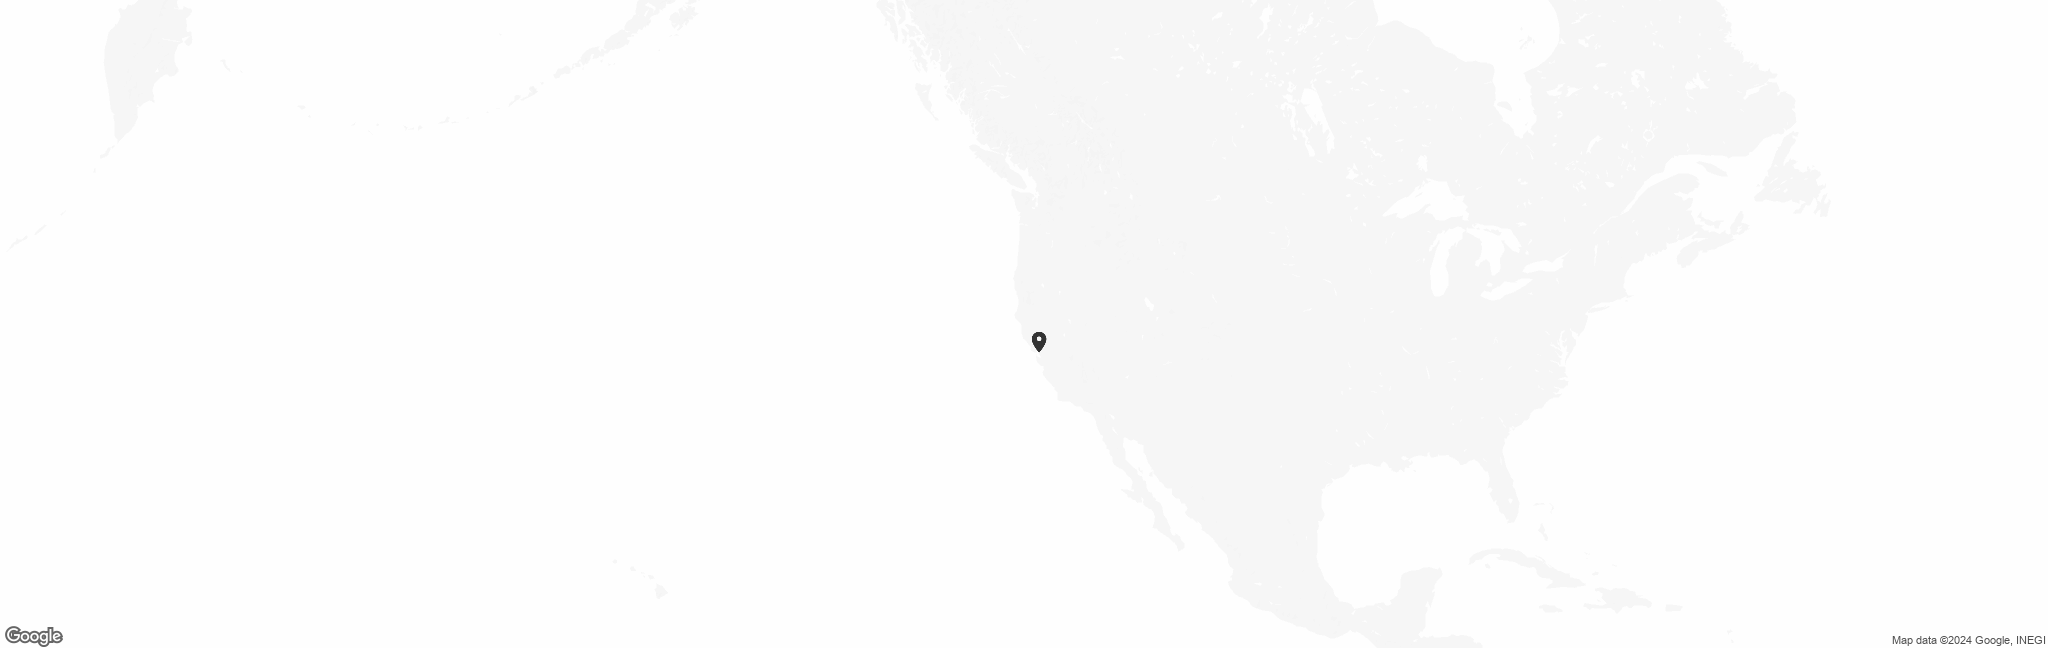 Map of US with pin of Willow Education Foundation (Bay Area Technology School) location